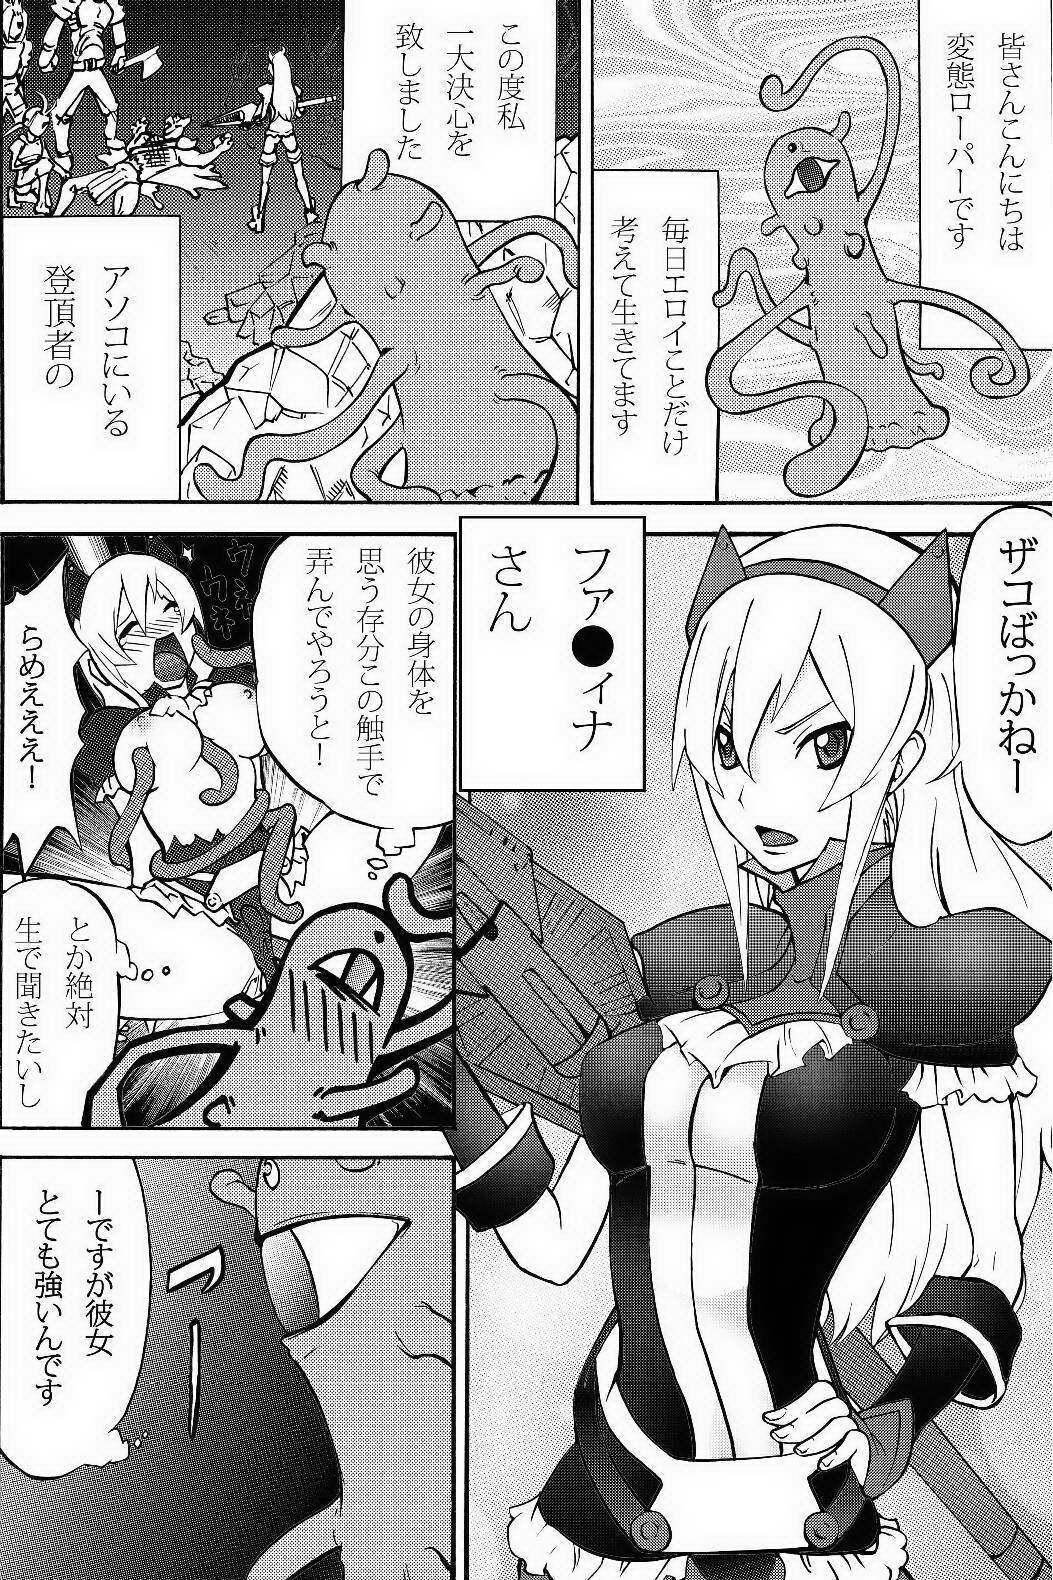 Clothed Ramerame Touchou Musume. - Tower of druaga Cutie - Page 3